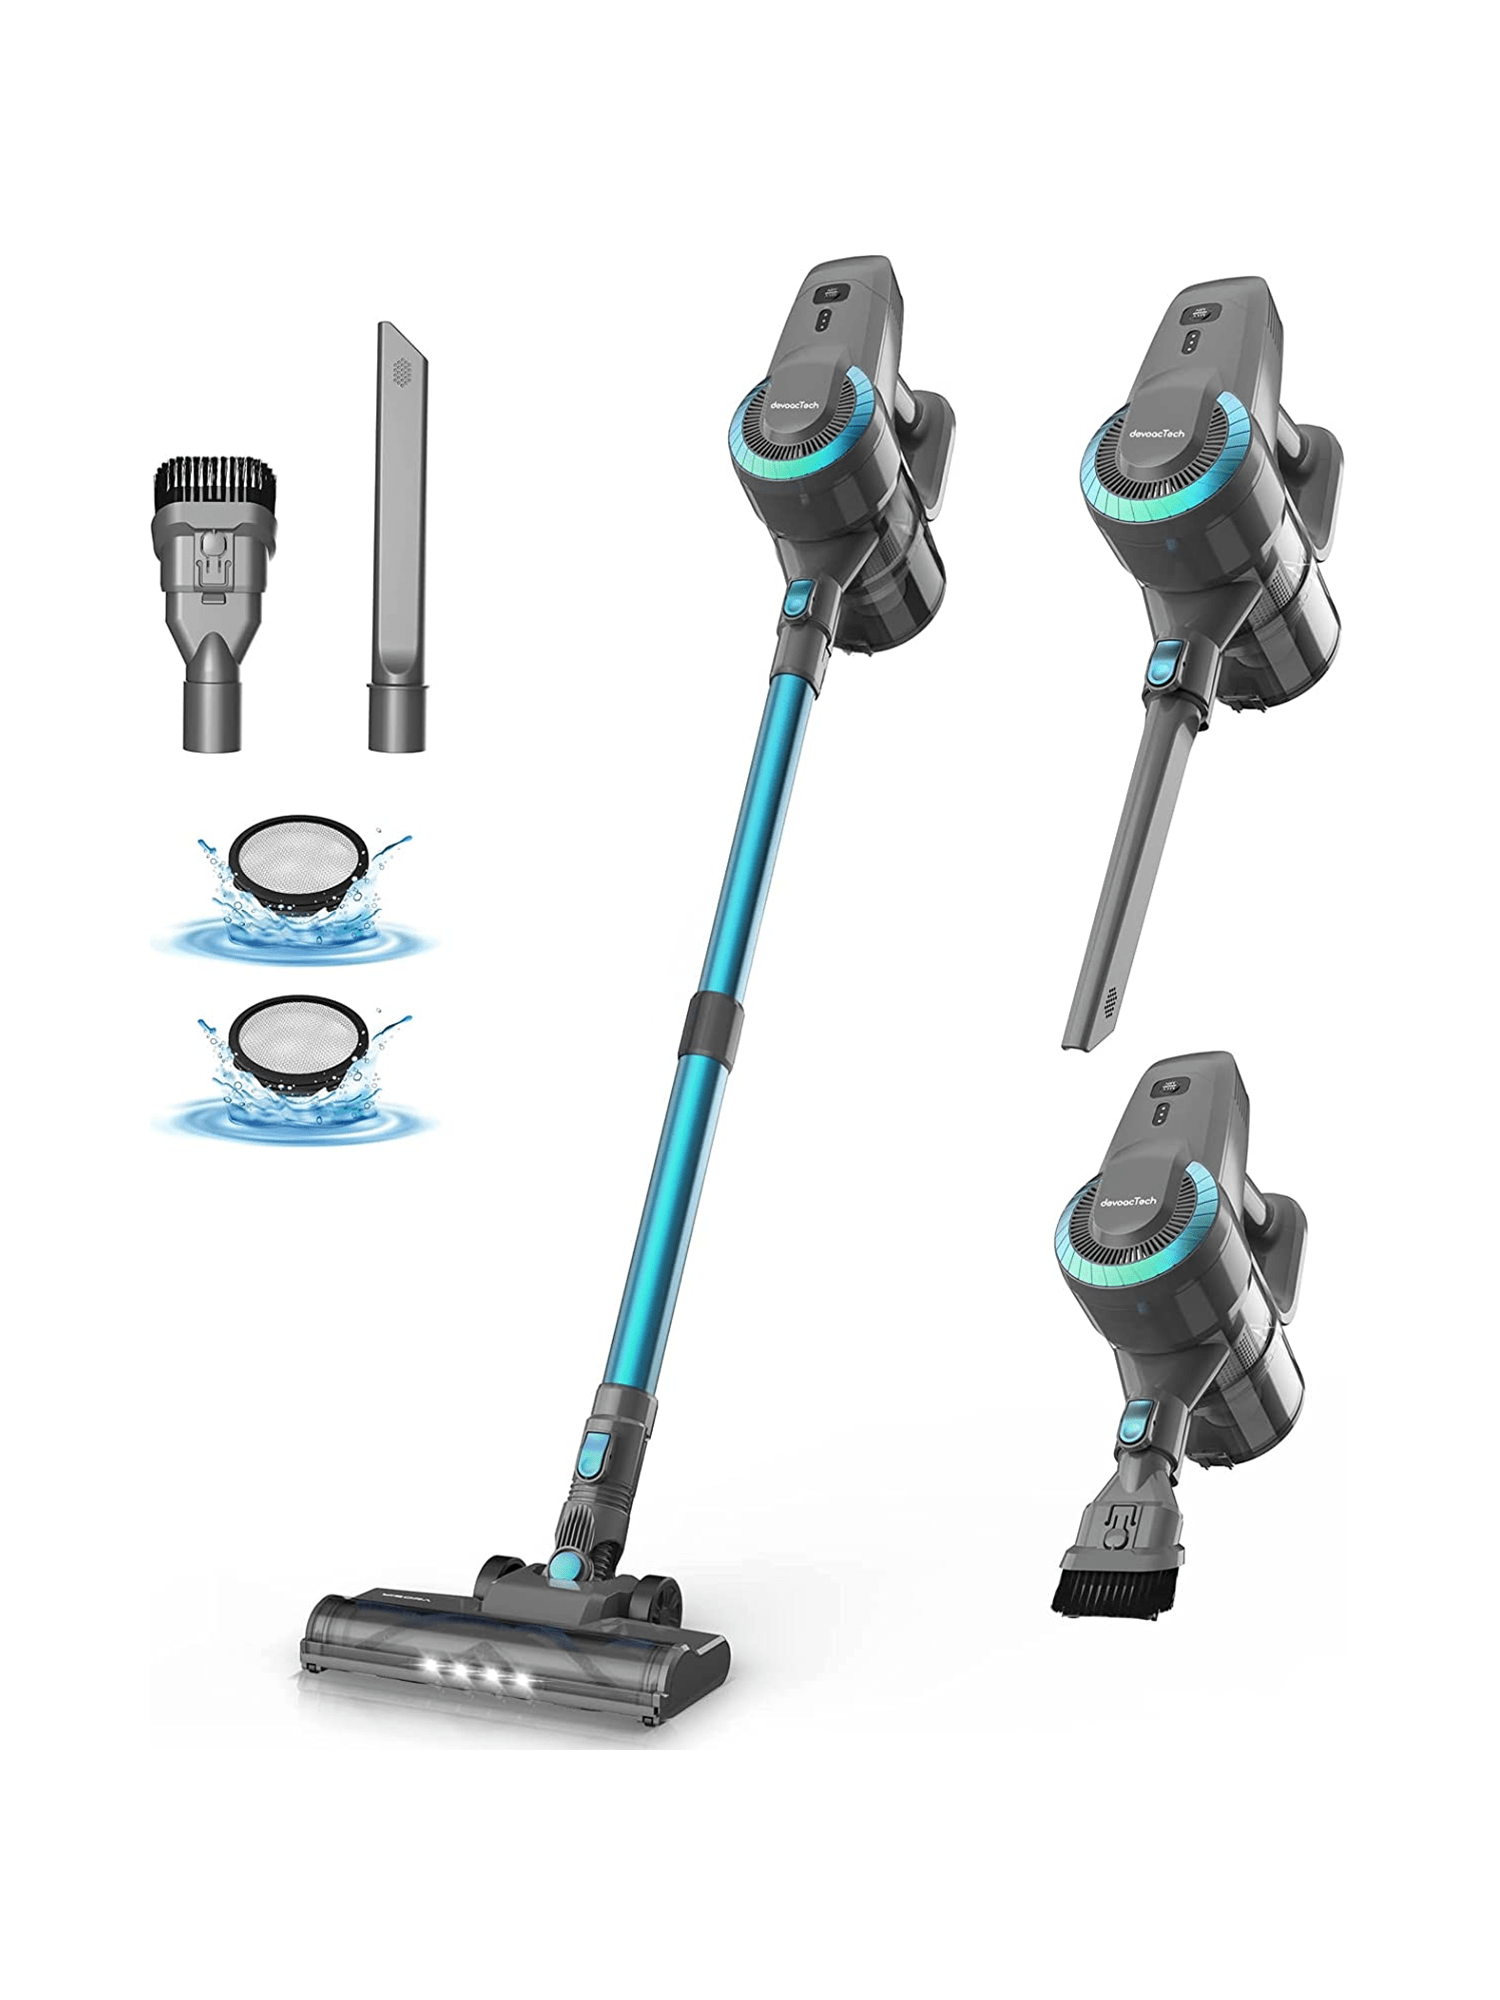 INSE N500 Cordless Vacuum Cleaner, 6 in 1 Rechargeable Powerful